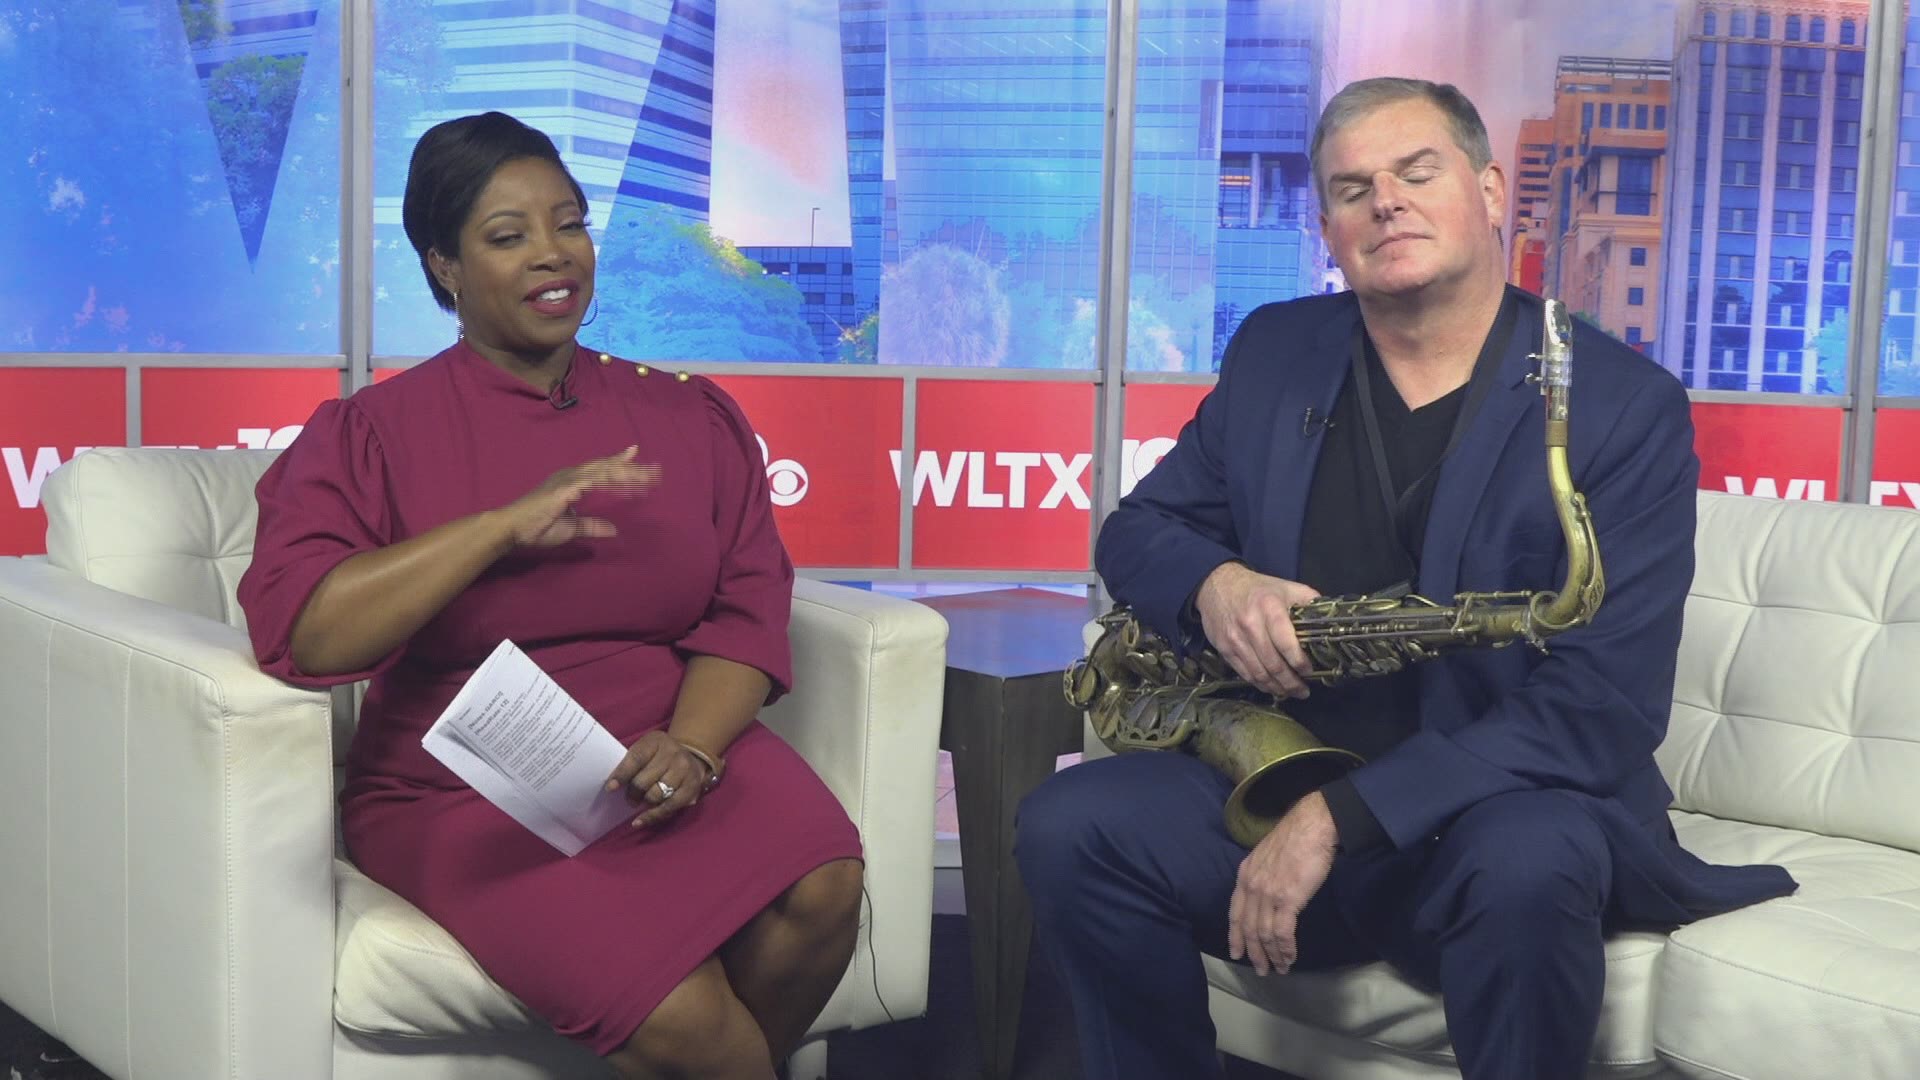 The SC Jazz Masterworks Ensemble talks about their upcoming concert with Kenny Barron.